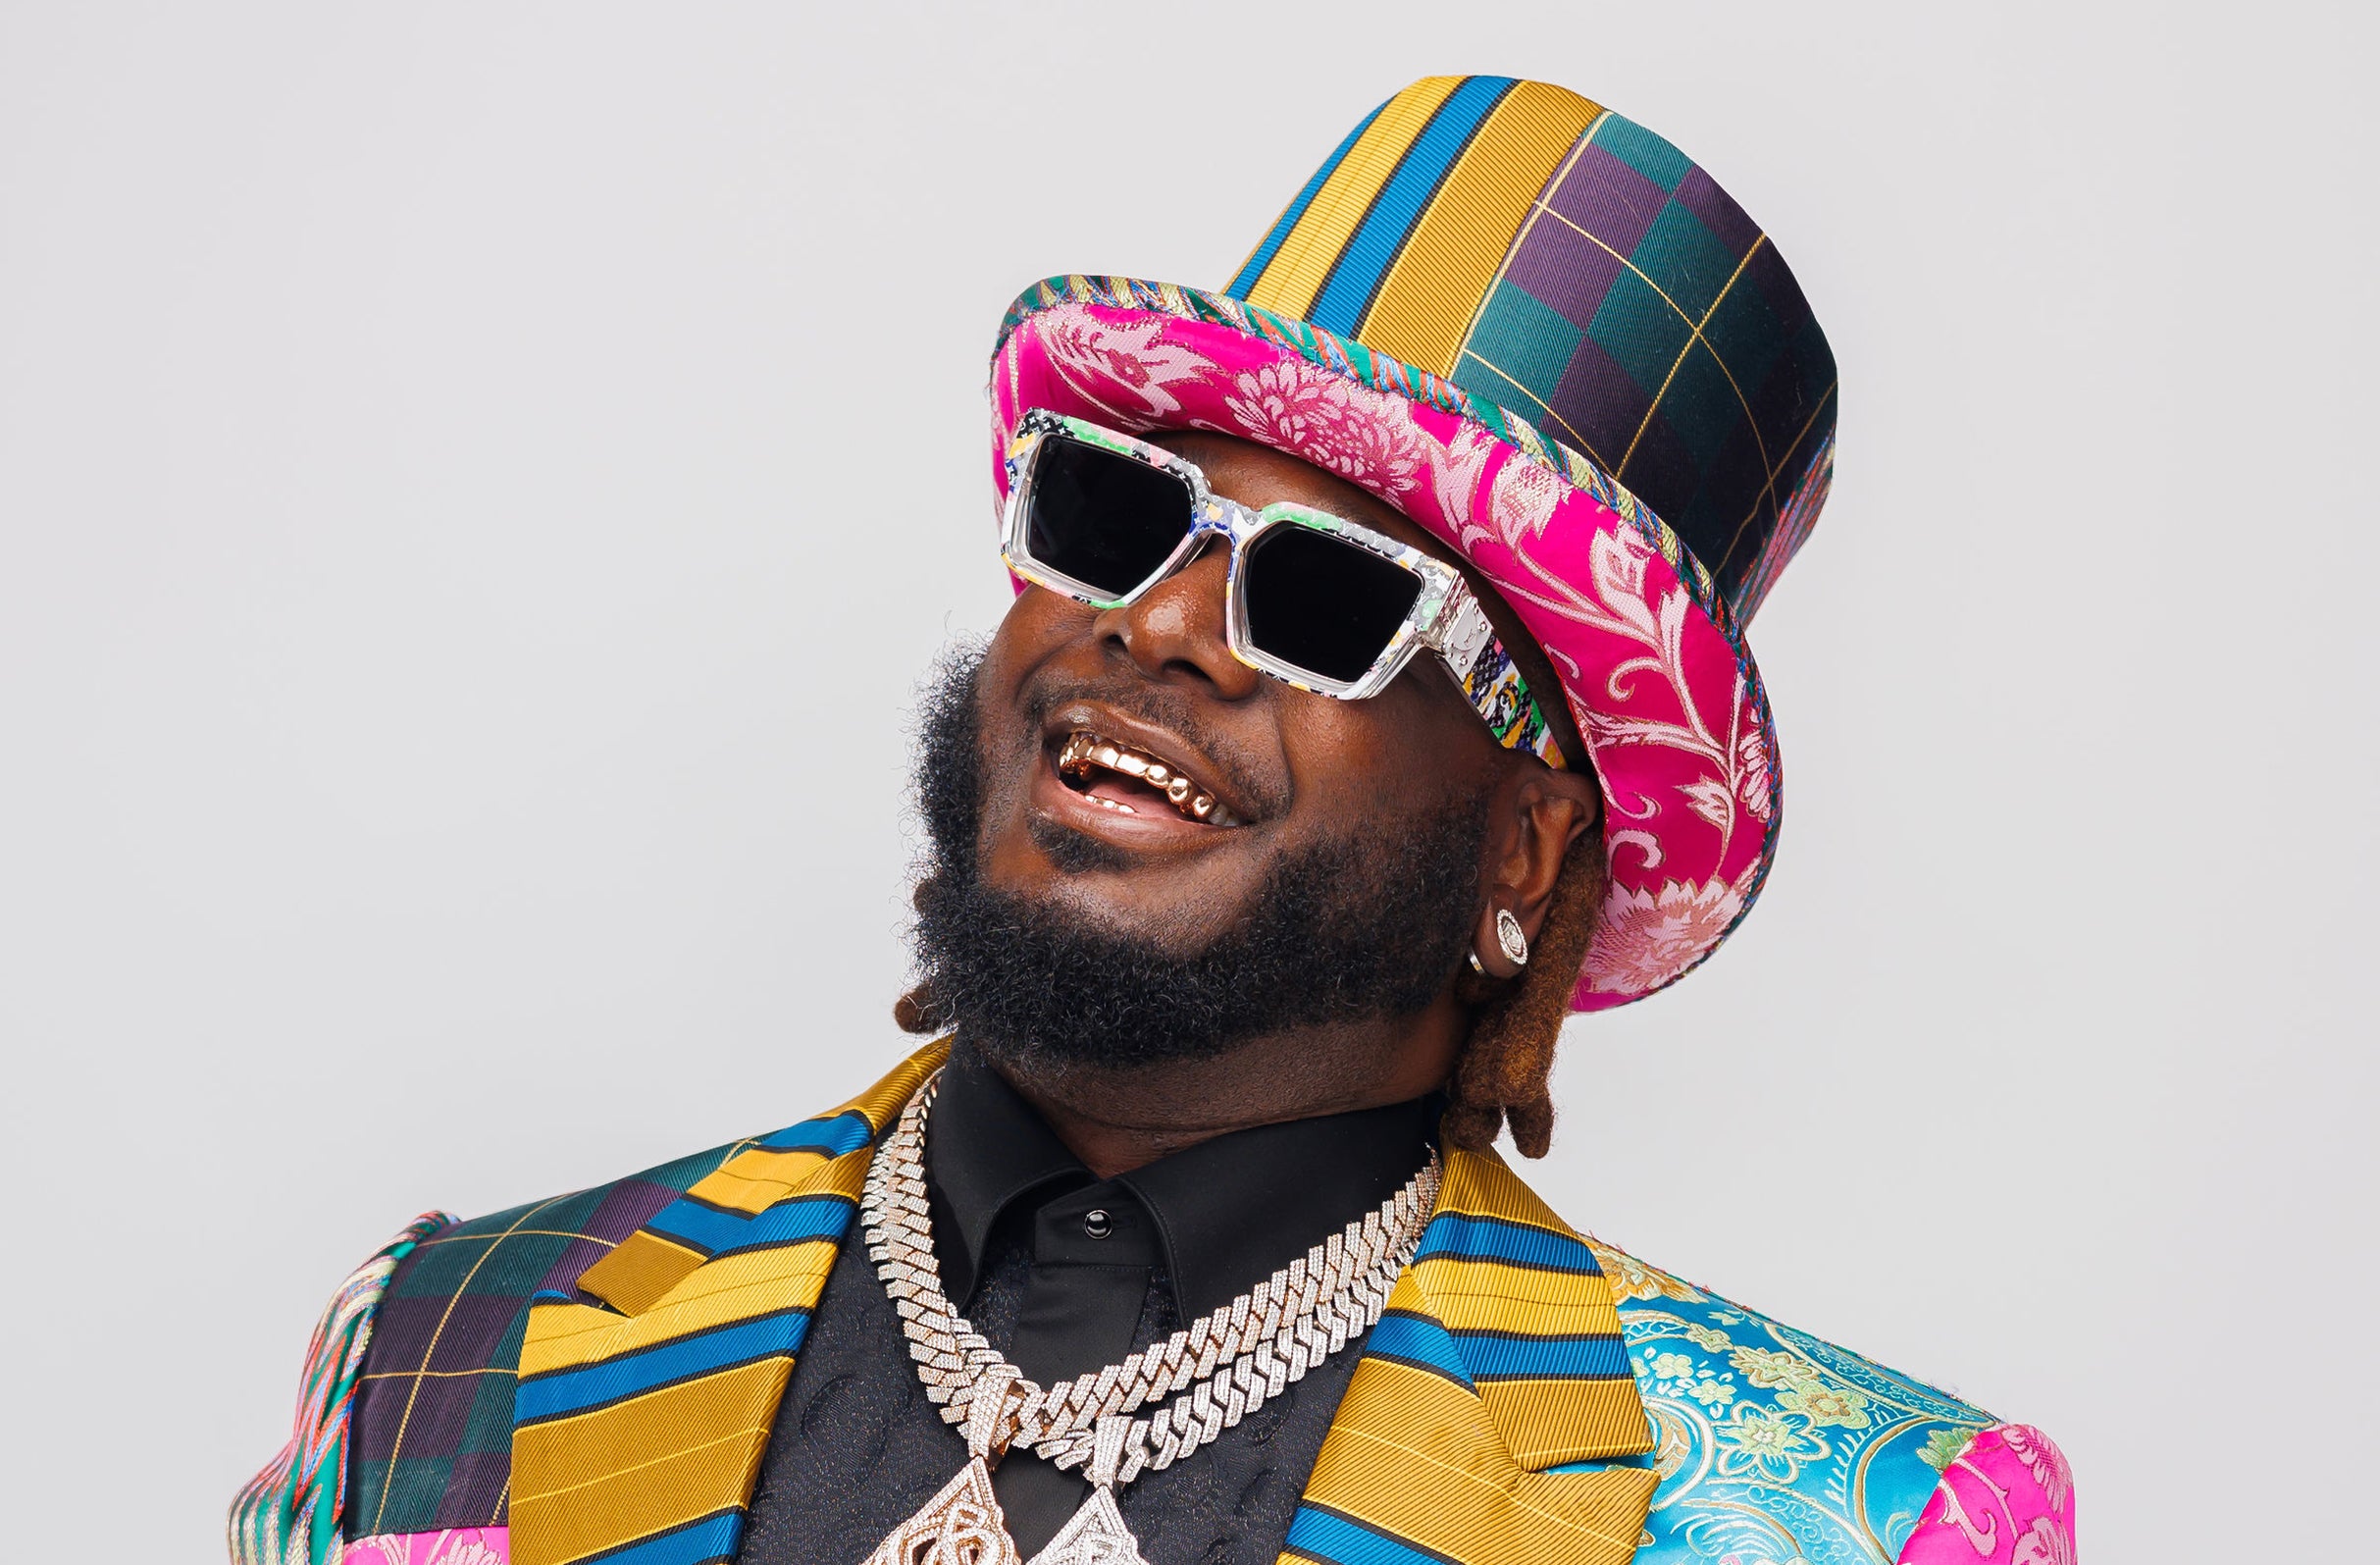 members only presale code for T-Pain's Mansion In Wiscansin Party advanced tickets in New York